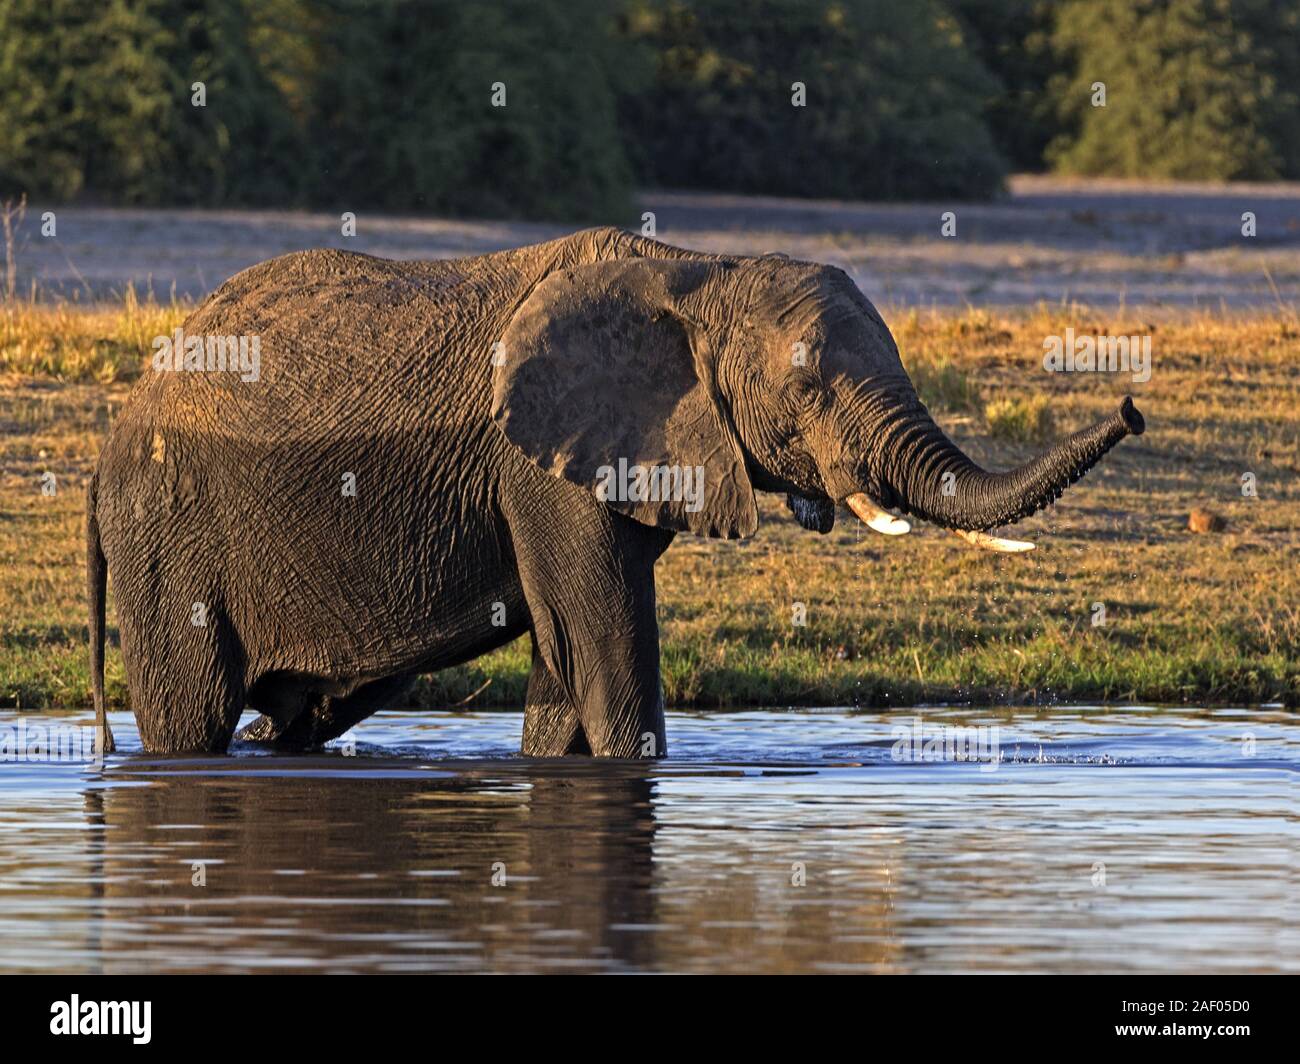 African bush elephant standing in water Stock Photo